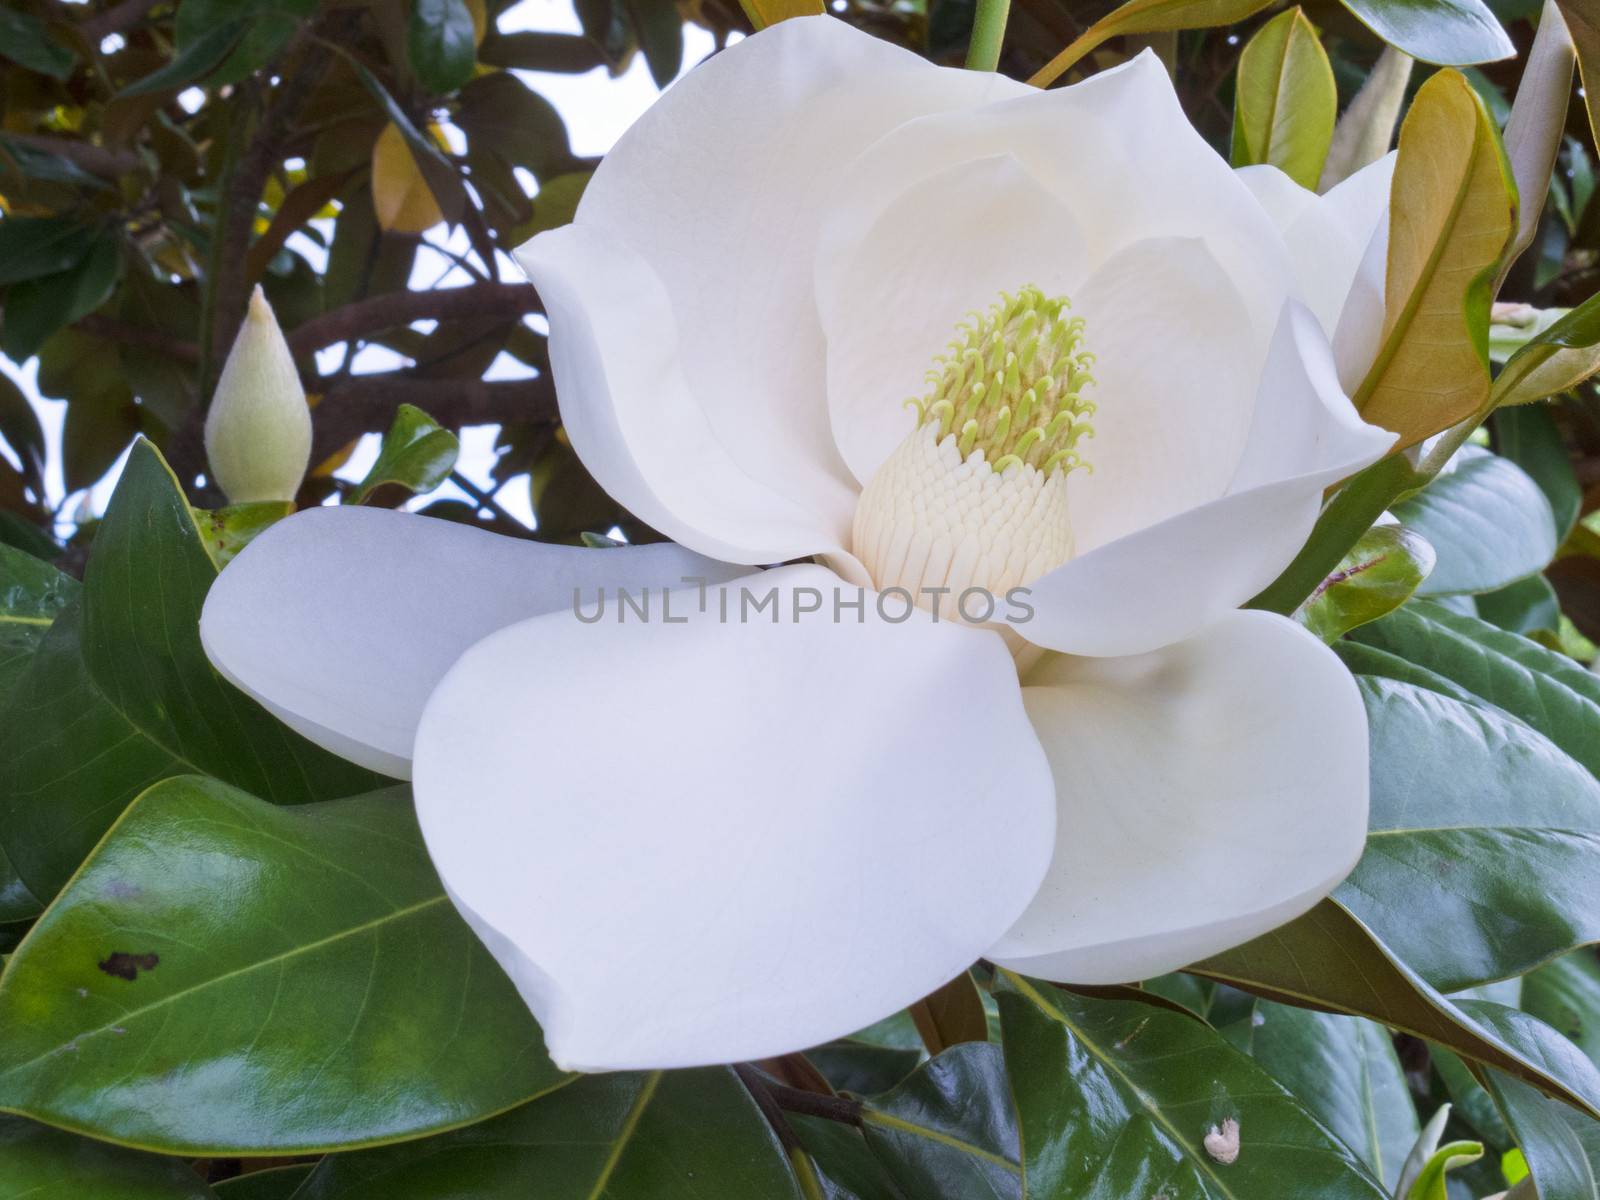 White Flower of Magnolia tree Magnolia sp. and leathery leaves close up